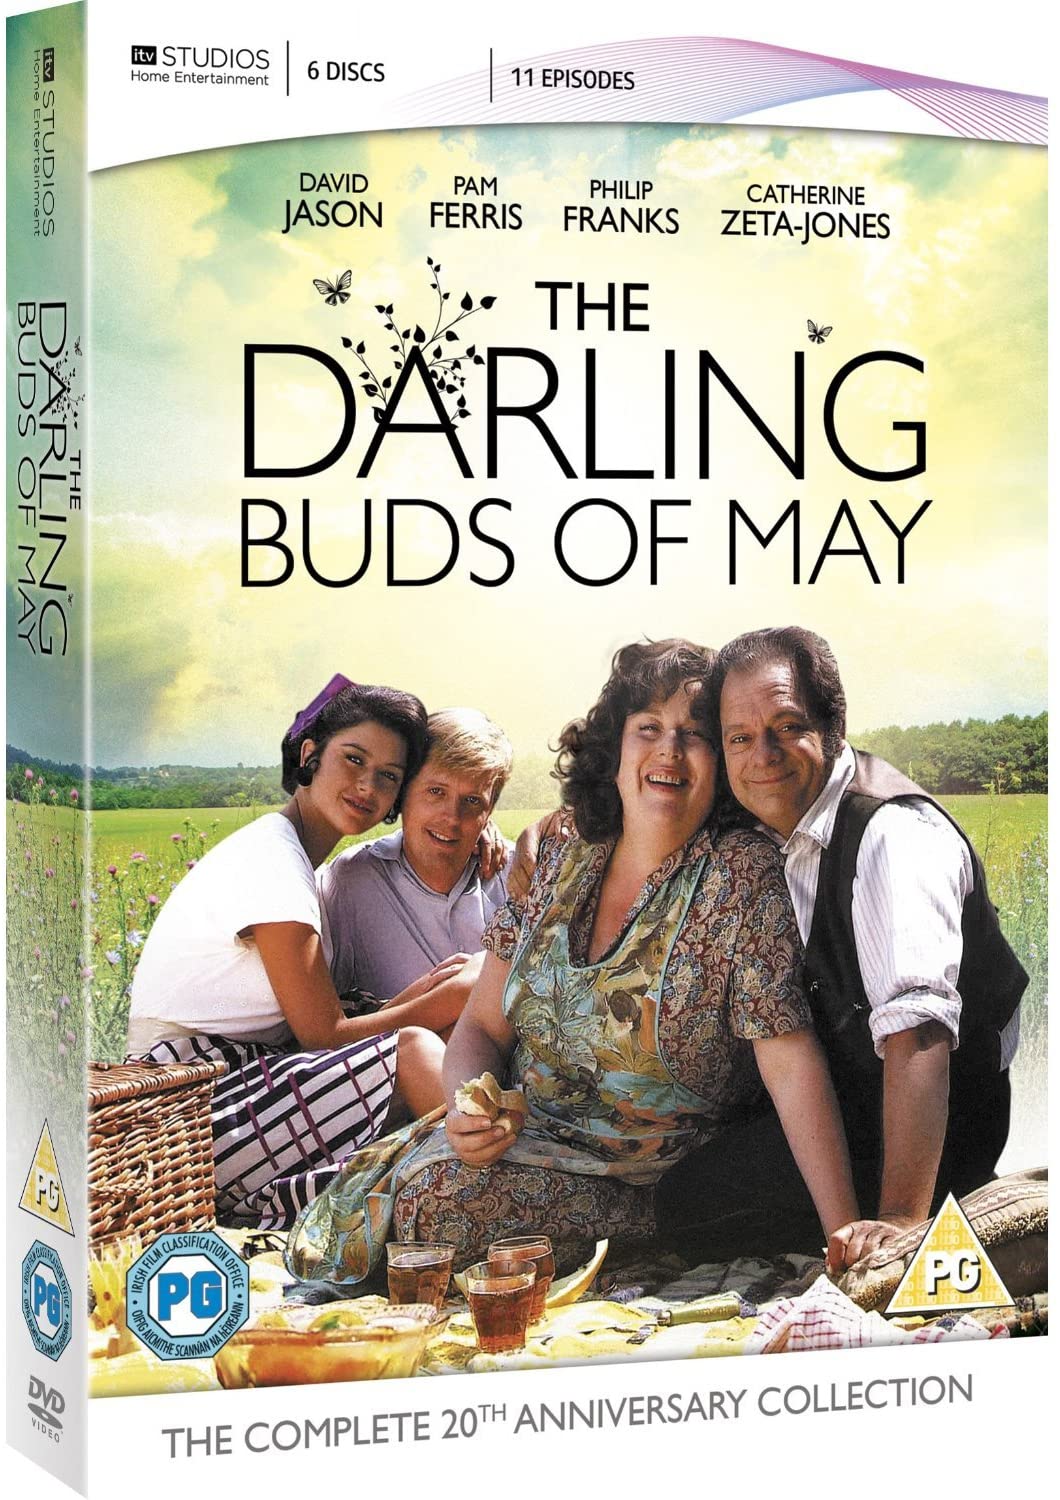 The Darling Buds of May - Collection complète 20e anniversaire [DVD]